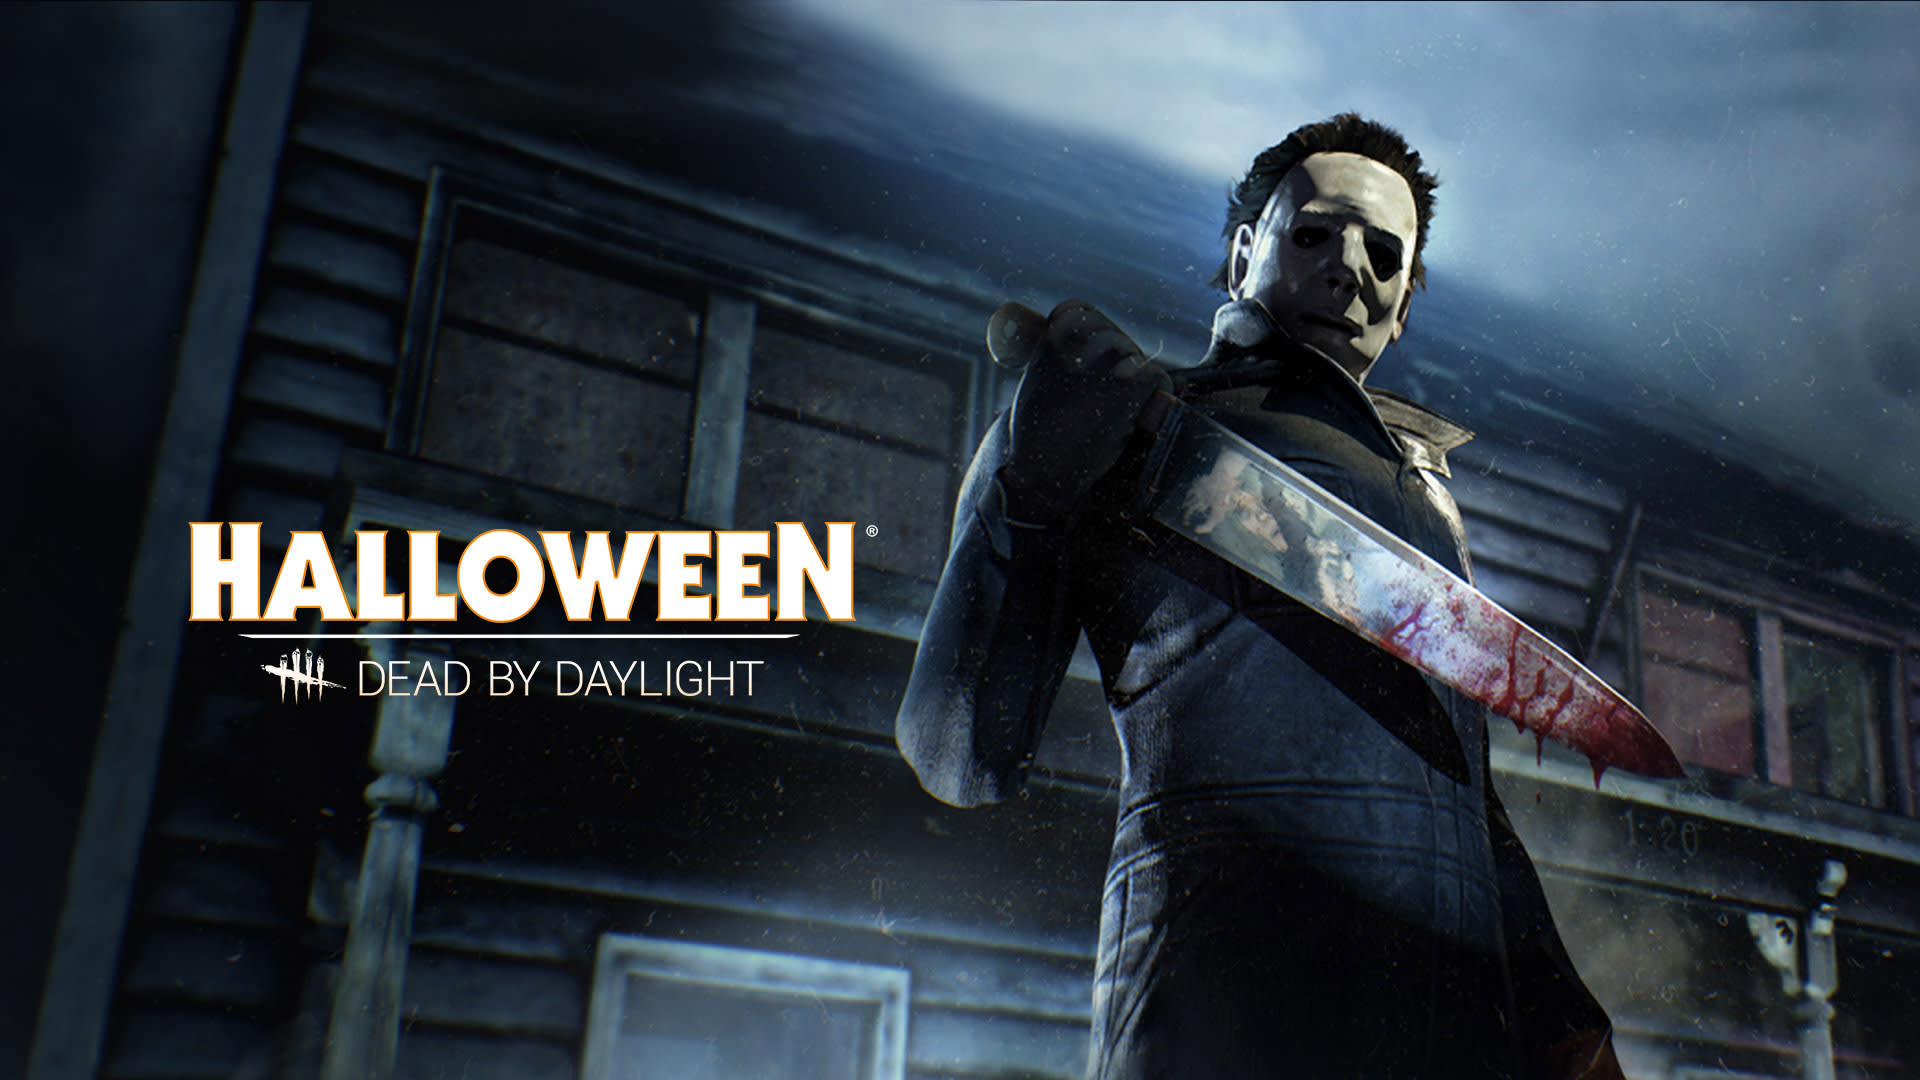 Dead by Daylight - The Halloween® Chapter